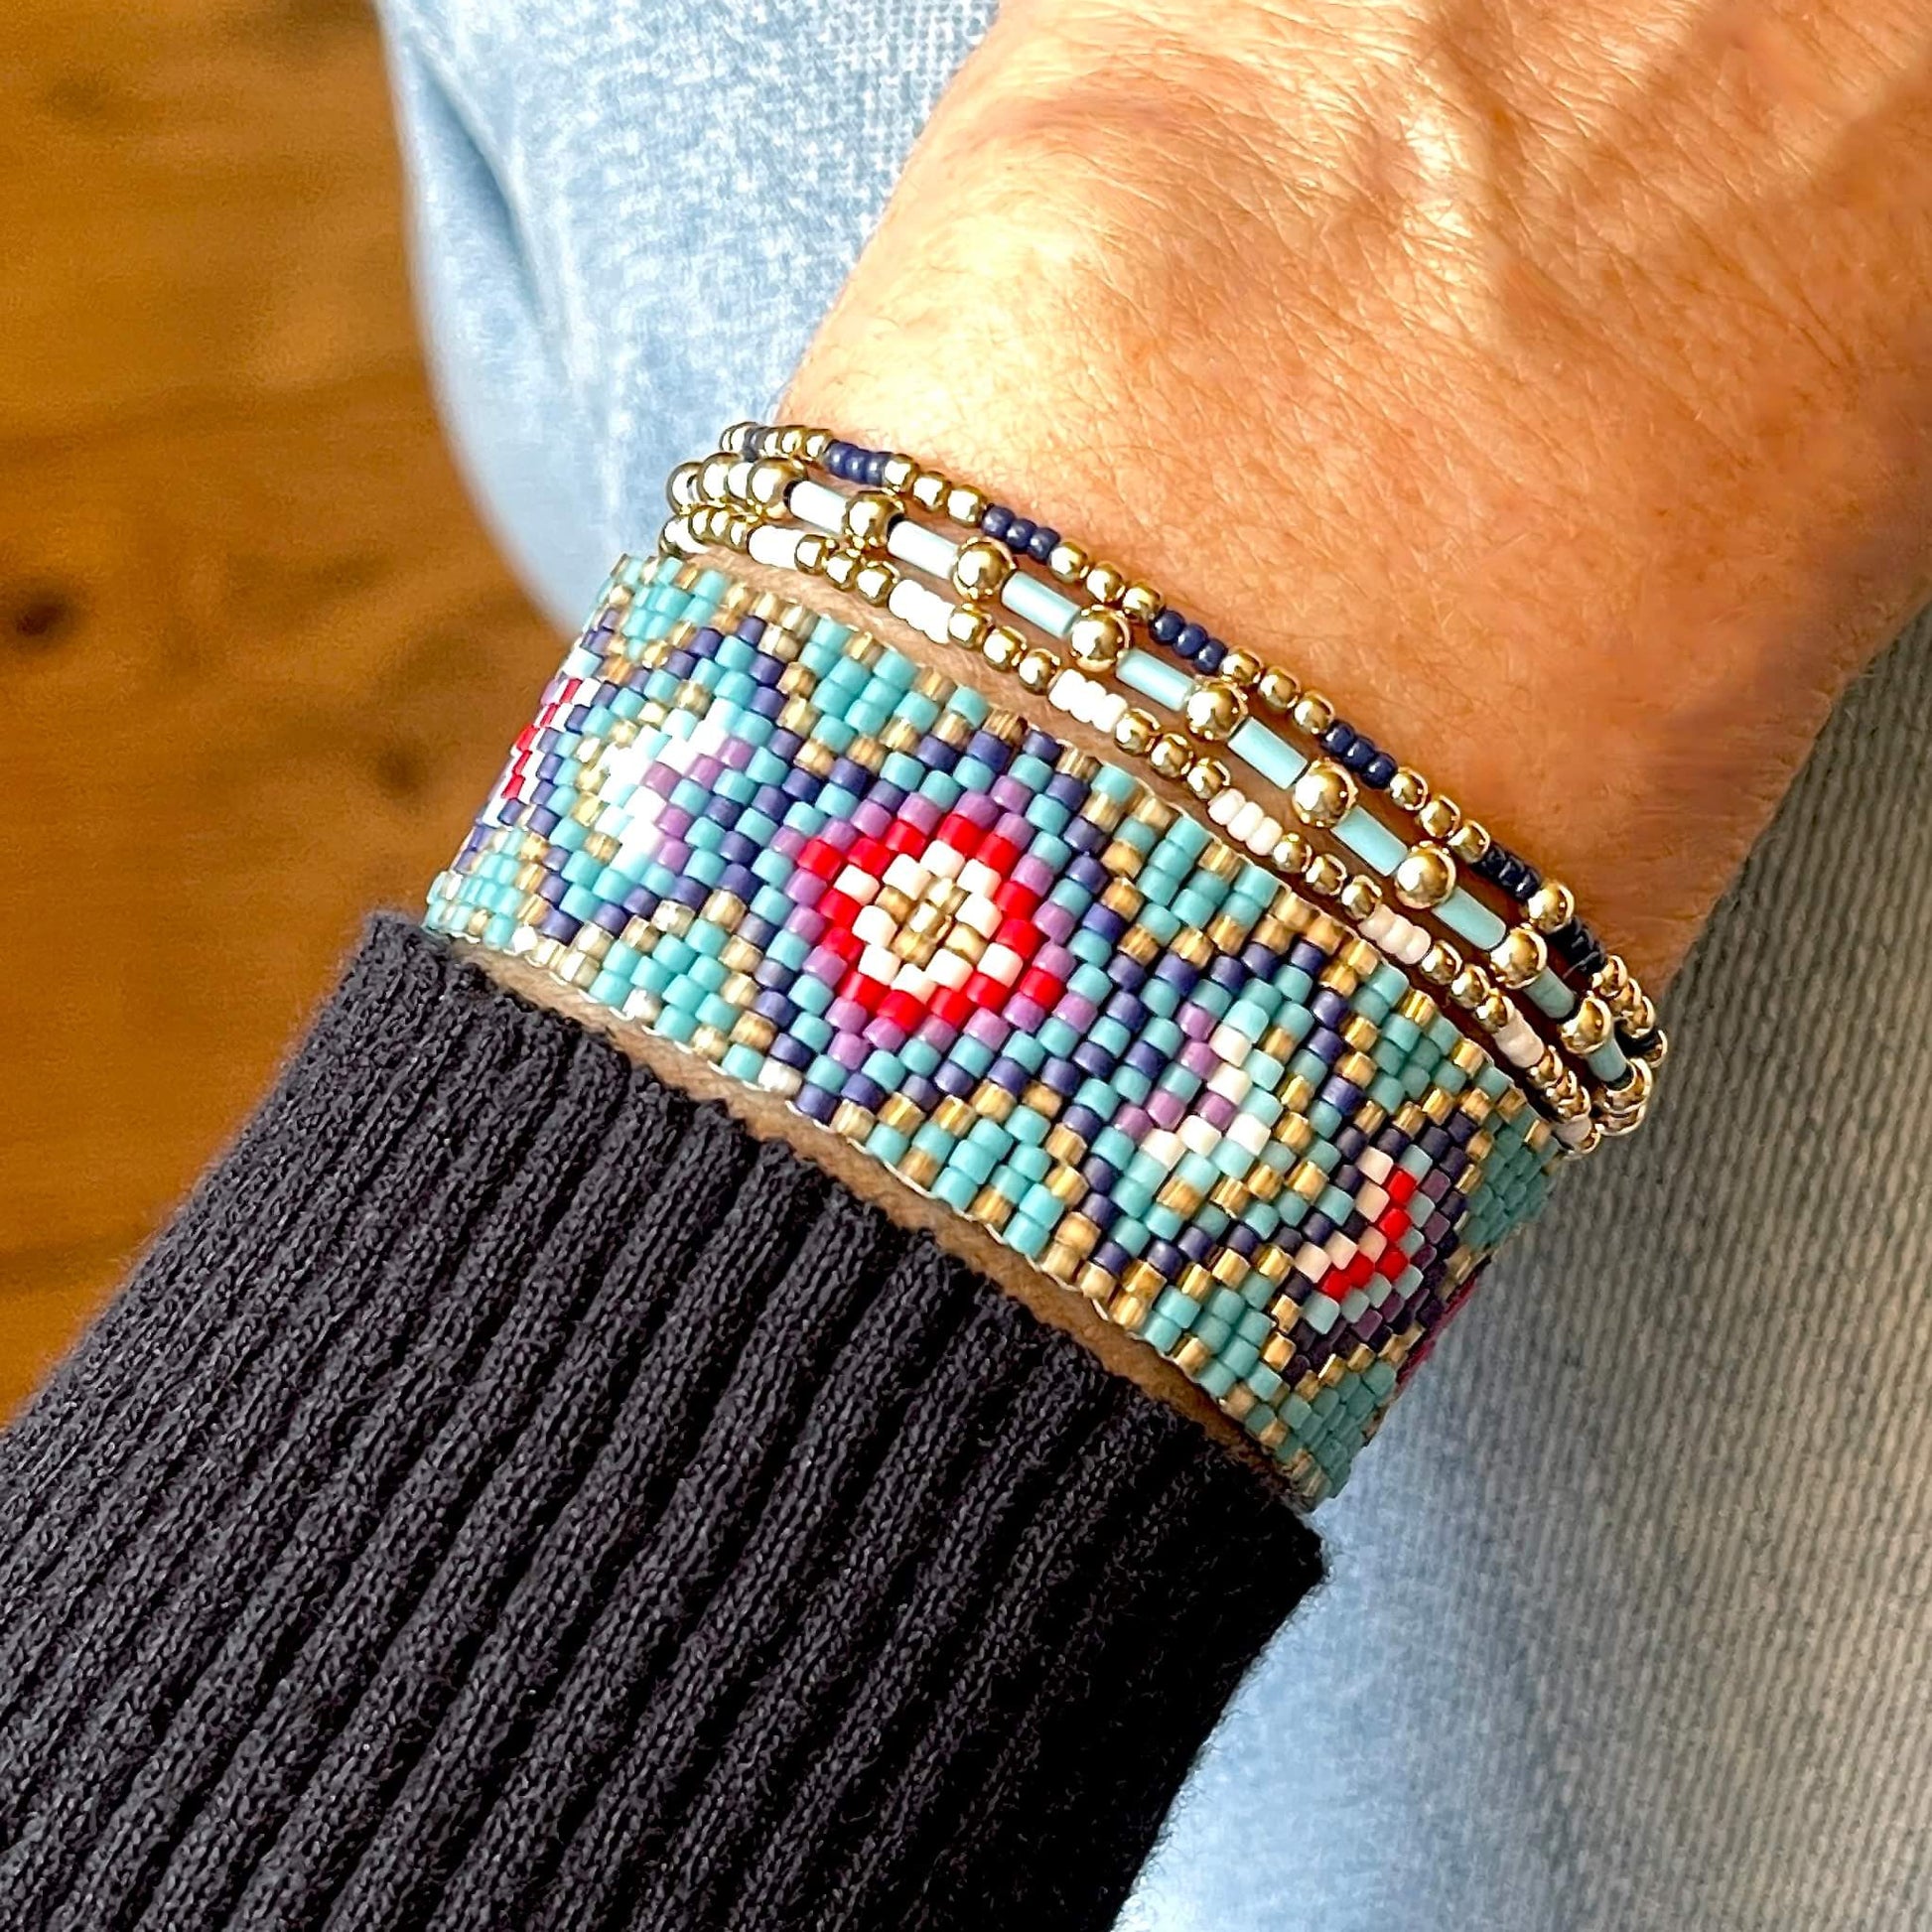 Seed bead cuff and stretch bracelet stack. A peyote band with turquoise, blue, and red diamonds, and 3 gold stretch bracelets with white, turquoise and navy beads.